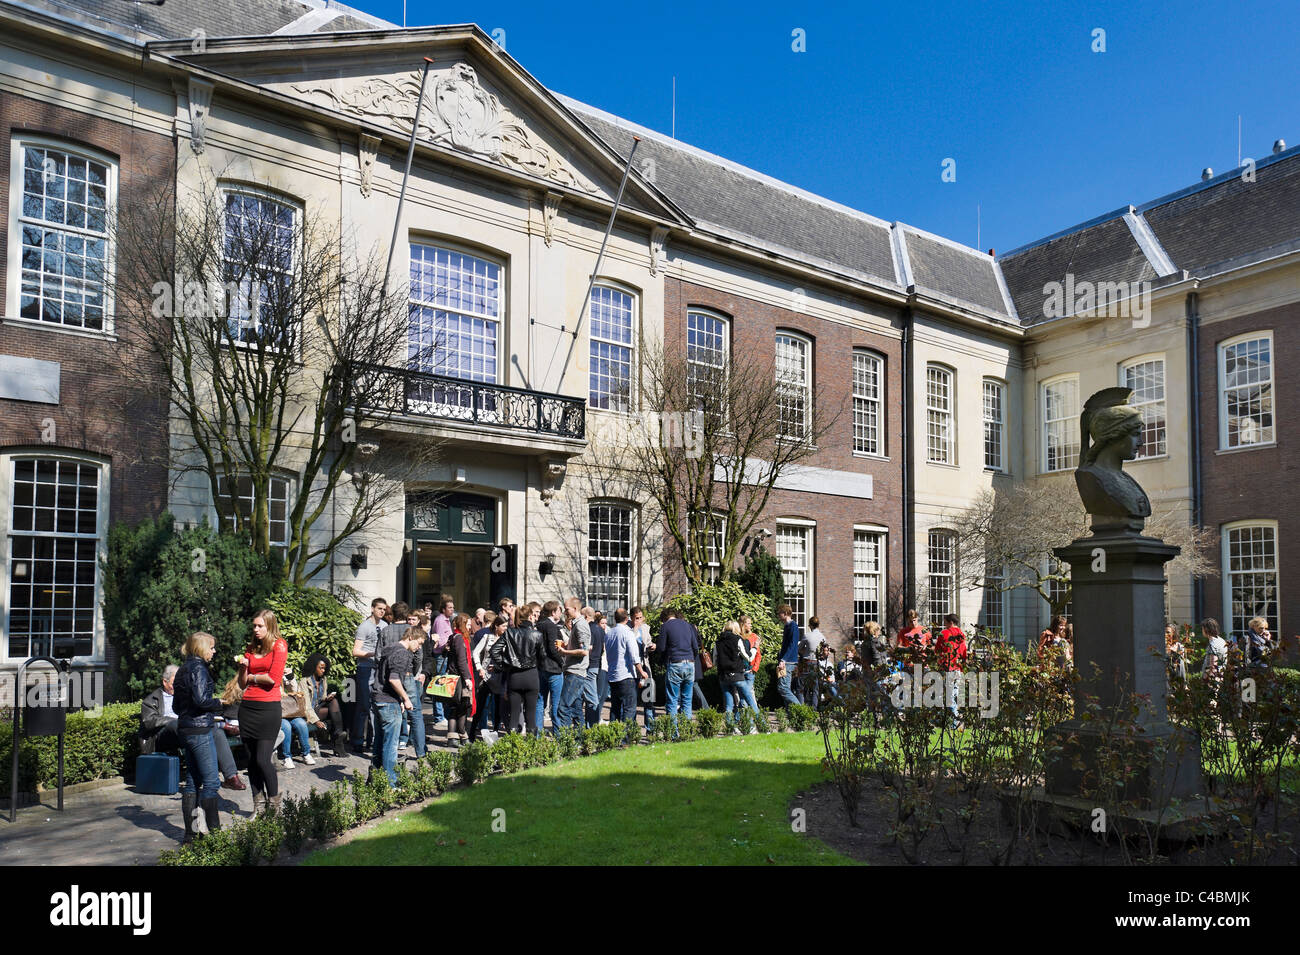 Students in front of the historic Oudemanhuispoort building in the University of Amsterdam, Amsterdam, Netherlands Stock Photo